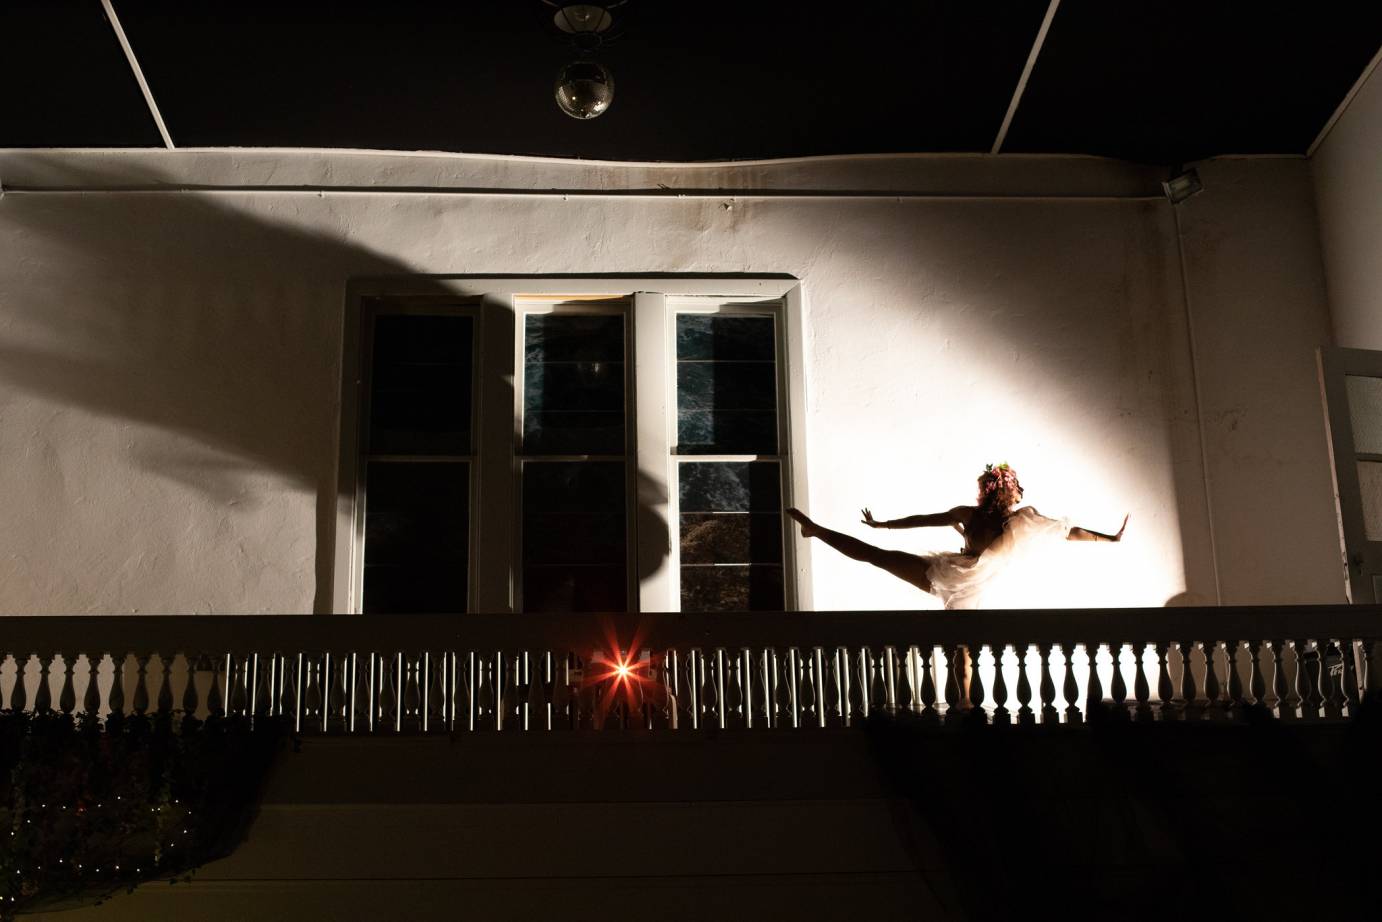 A woman extends her limbs in shadows on a balcony